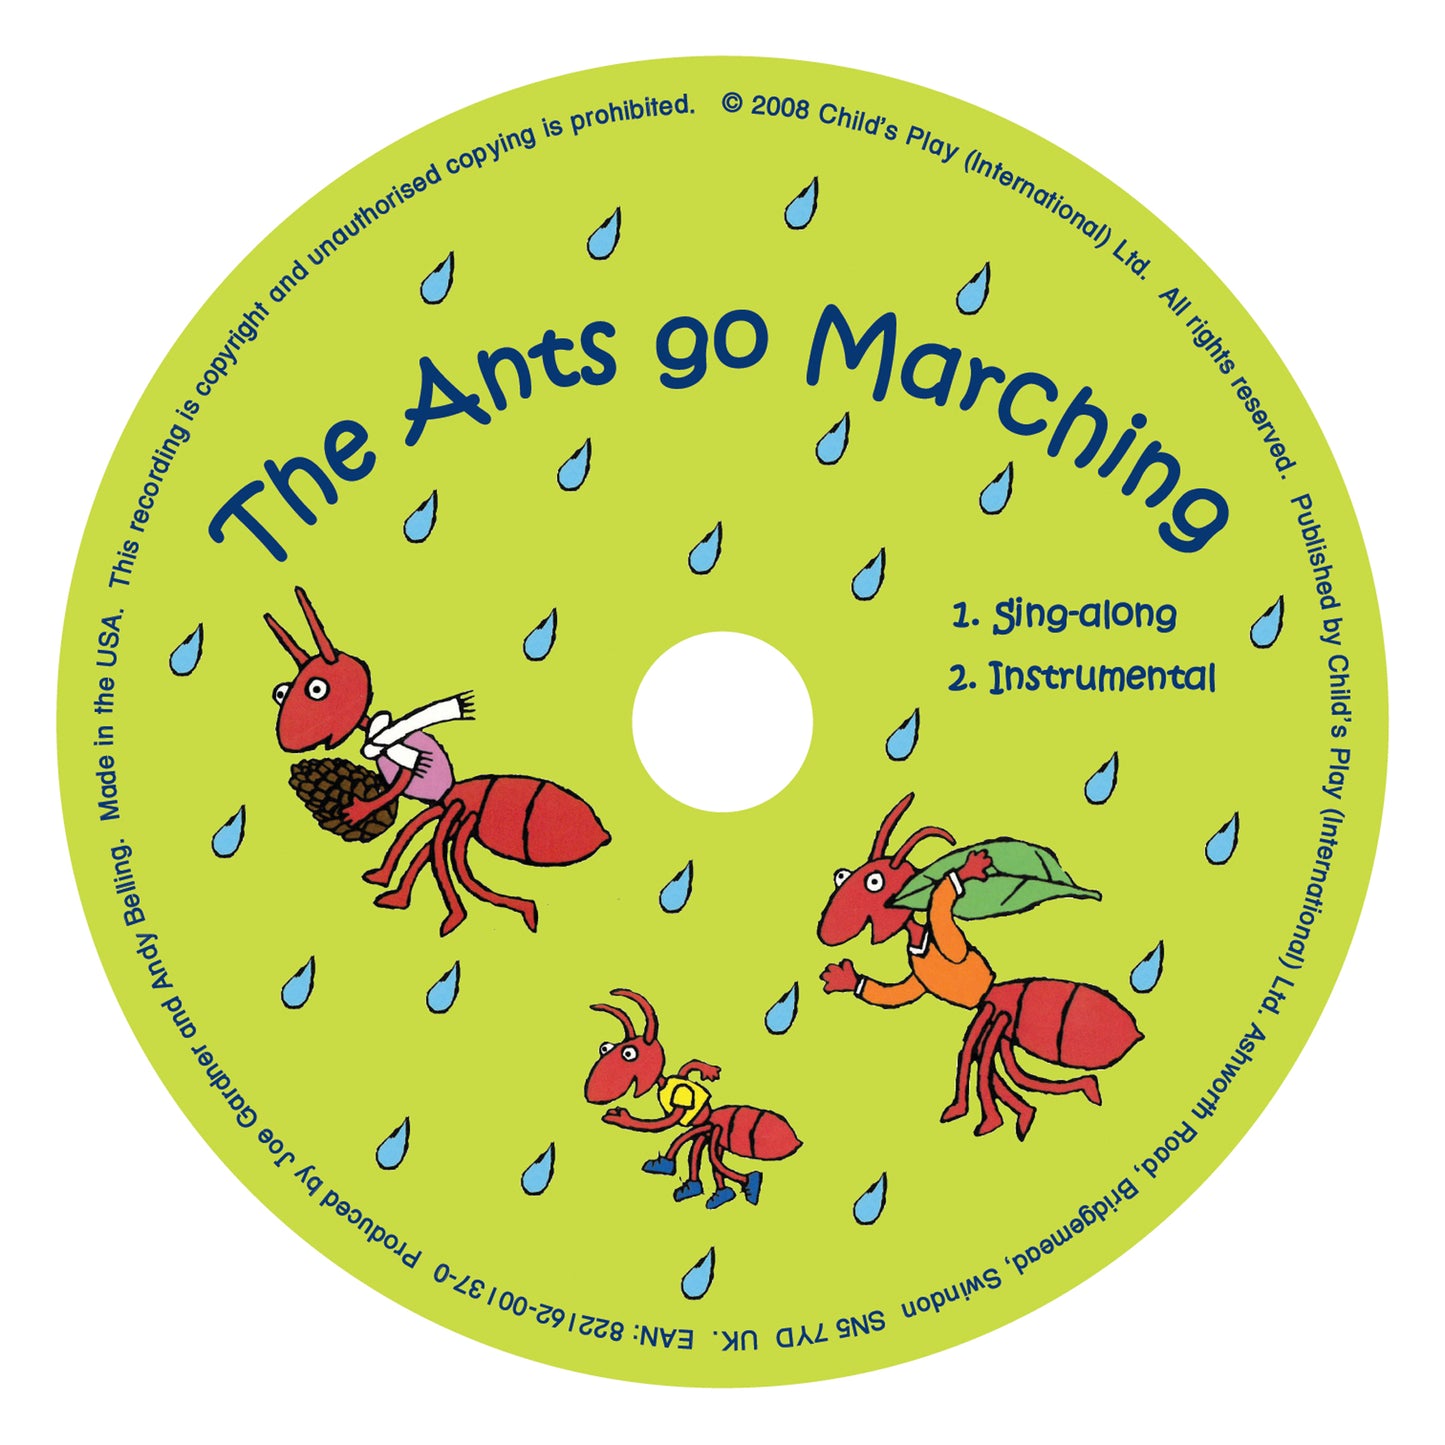 The Ants go Marching CD